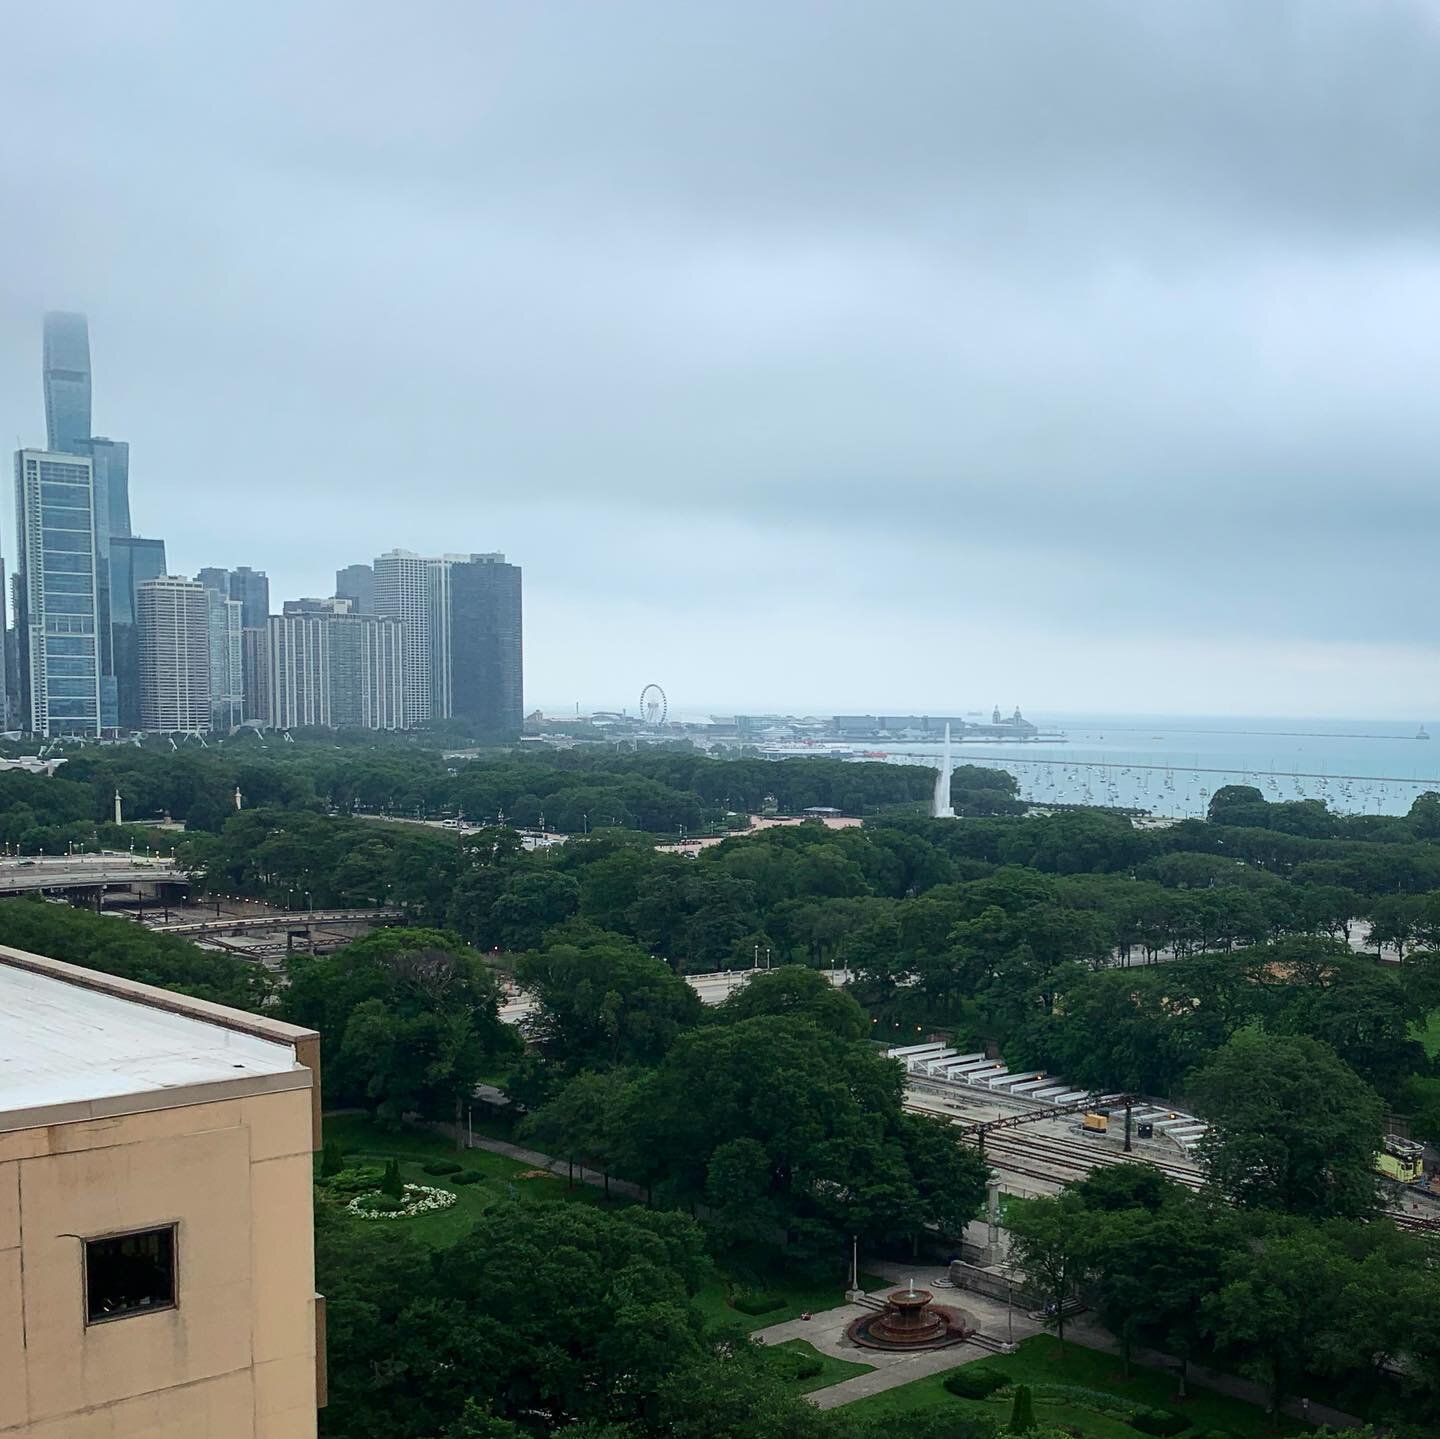 Caught this view on my first Chicago audition a week ago 🎭 Can&rsquo;t wait to explore this jungle 🏙🌳🌥 (also met some wonderful people &amp; we&rsquo;re shooting in two weeks🎥) #actor #audition #chicago #skyline #itsaliving